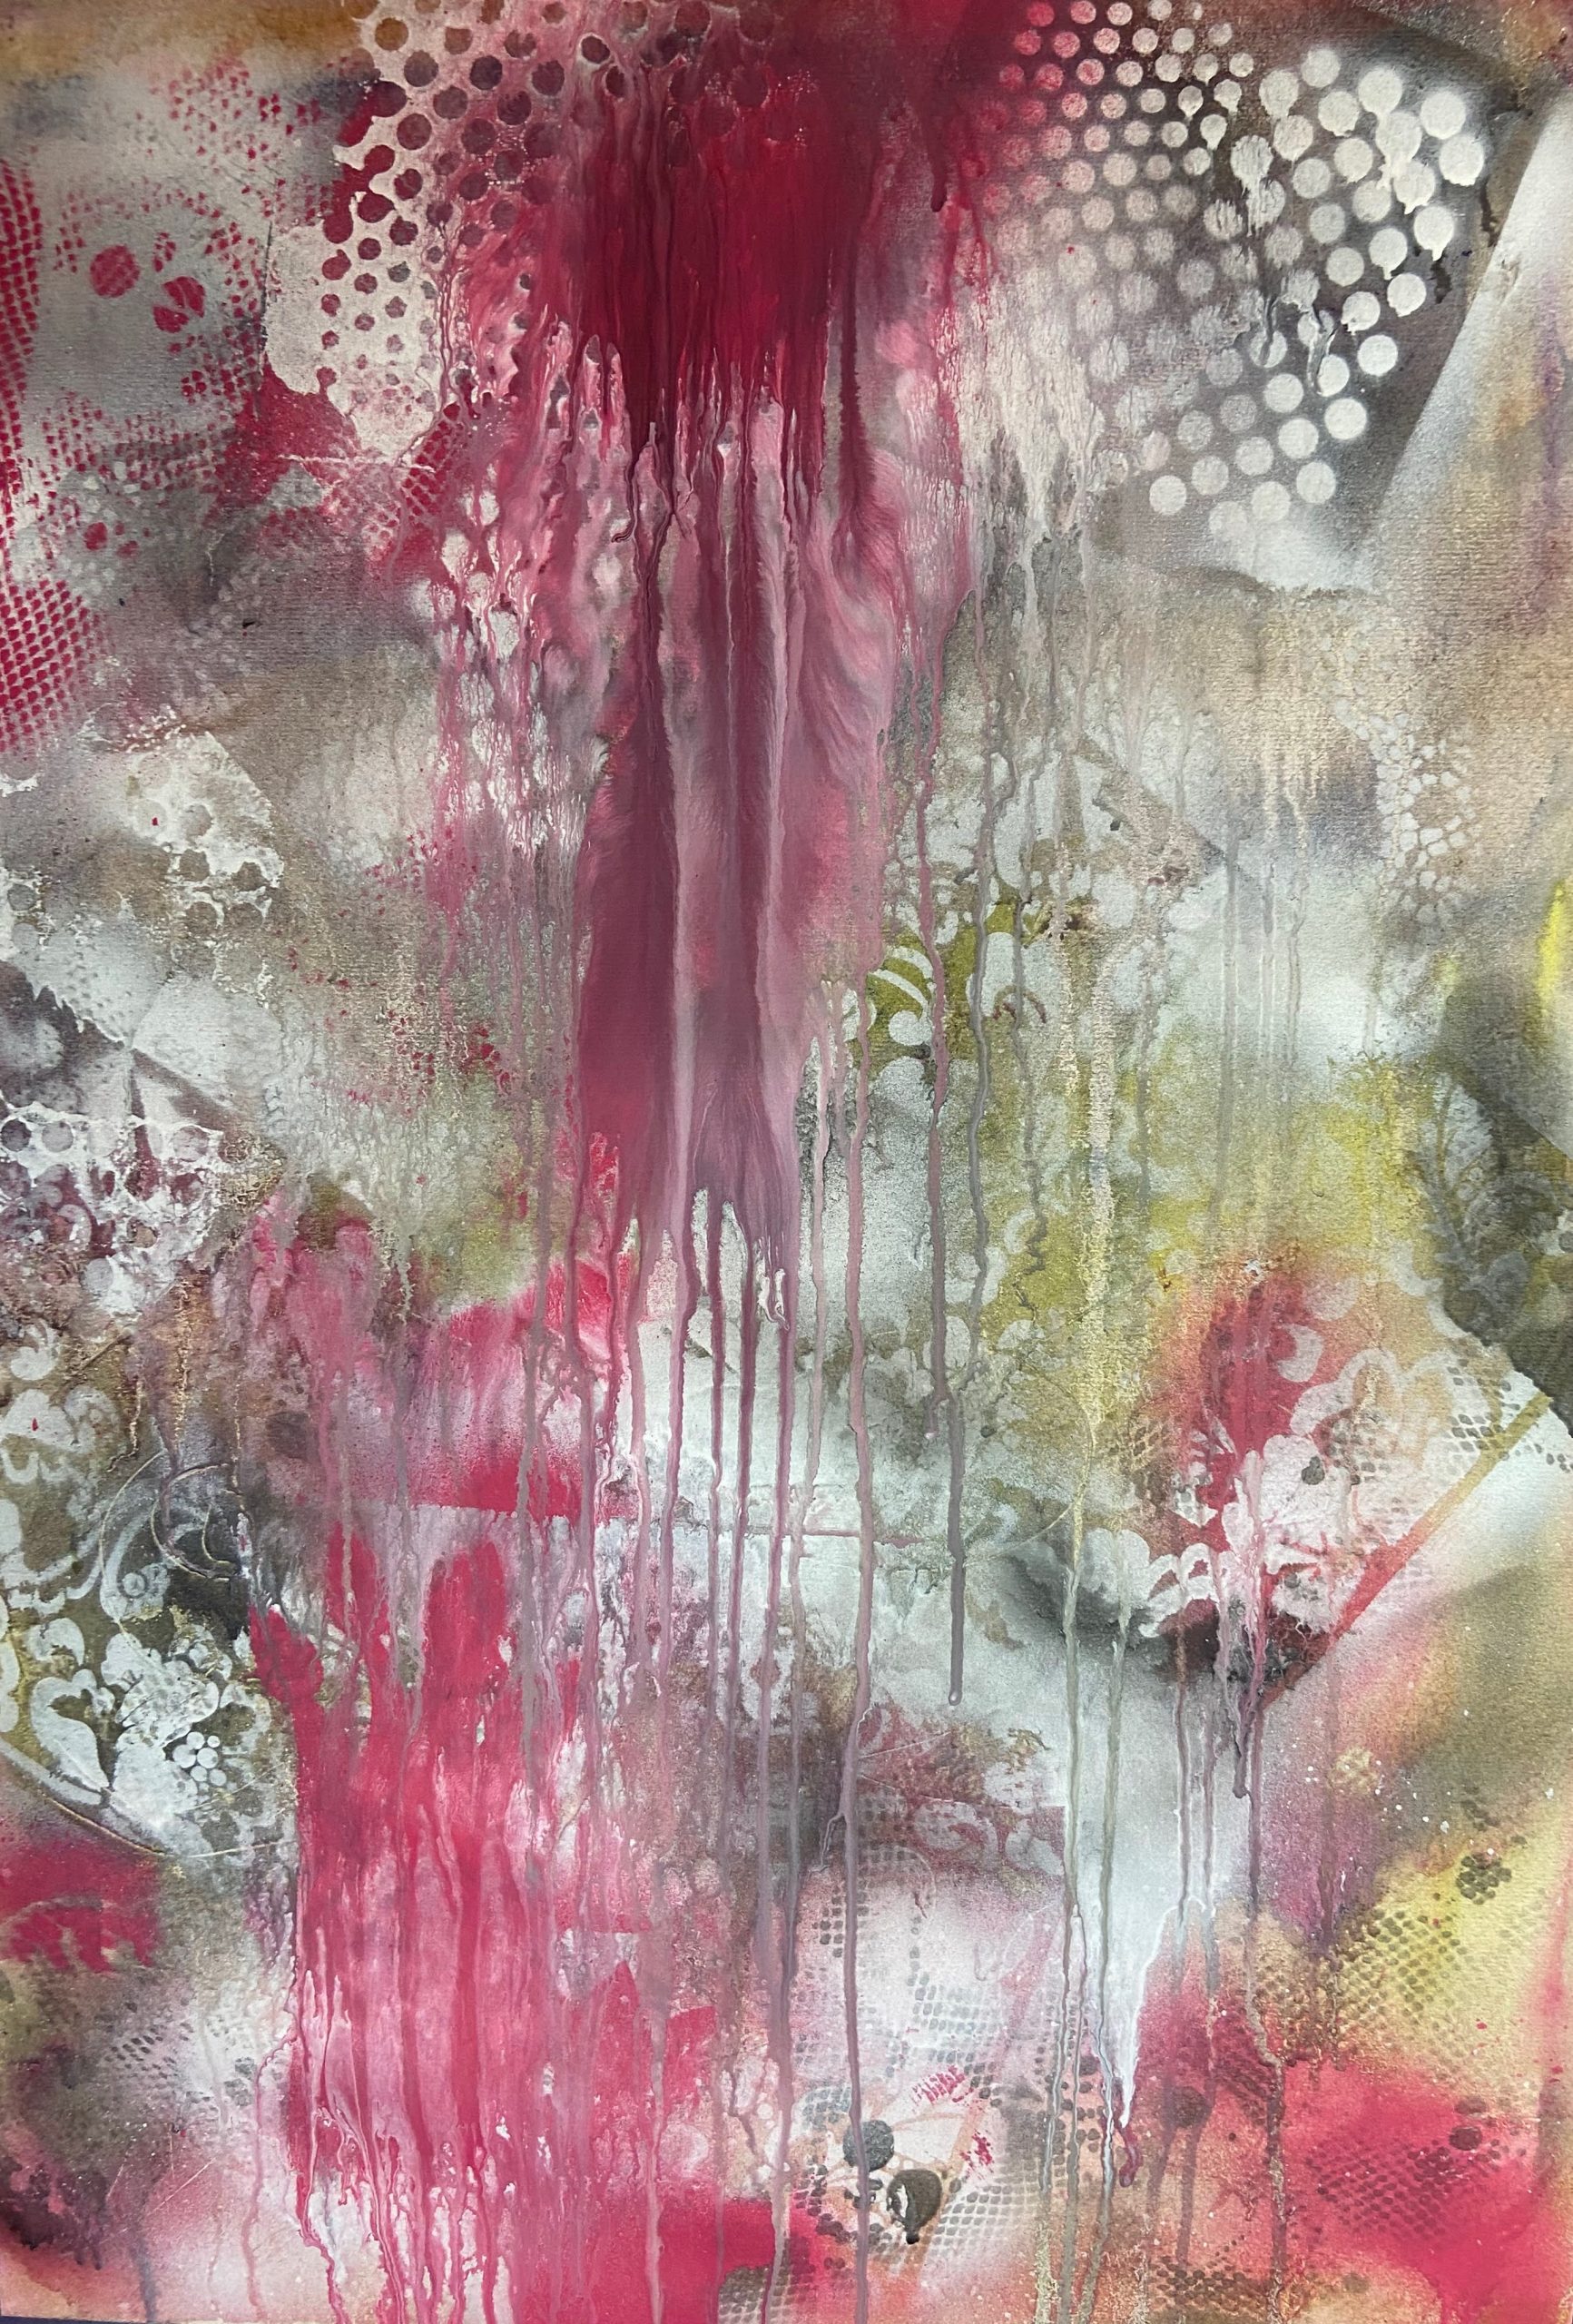 An abstract pinting using spray paint and stencils